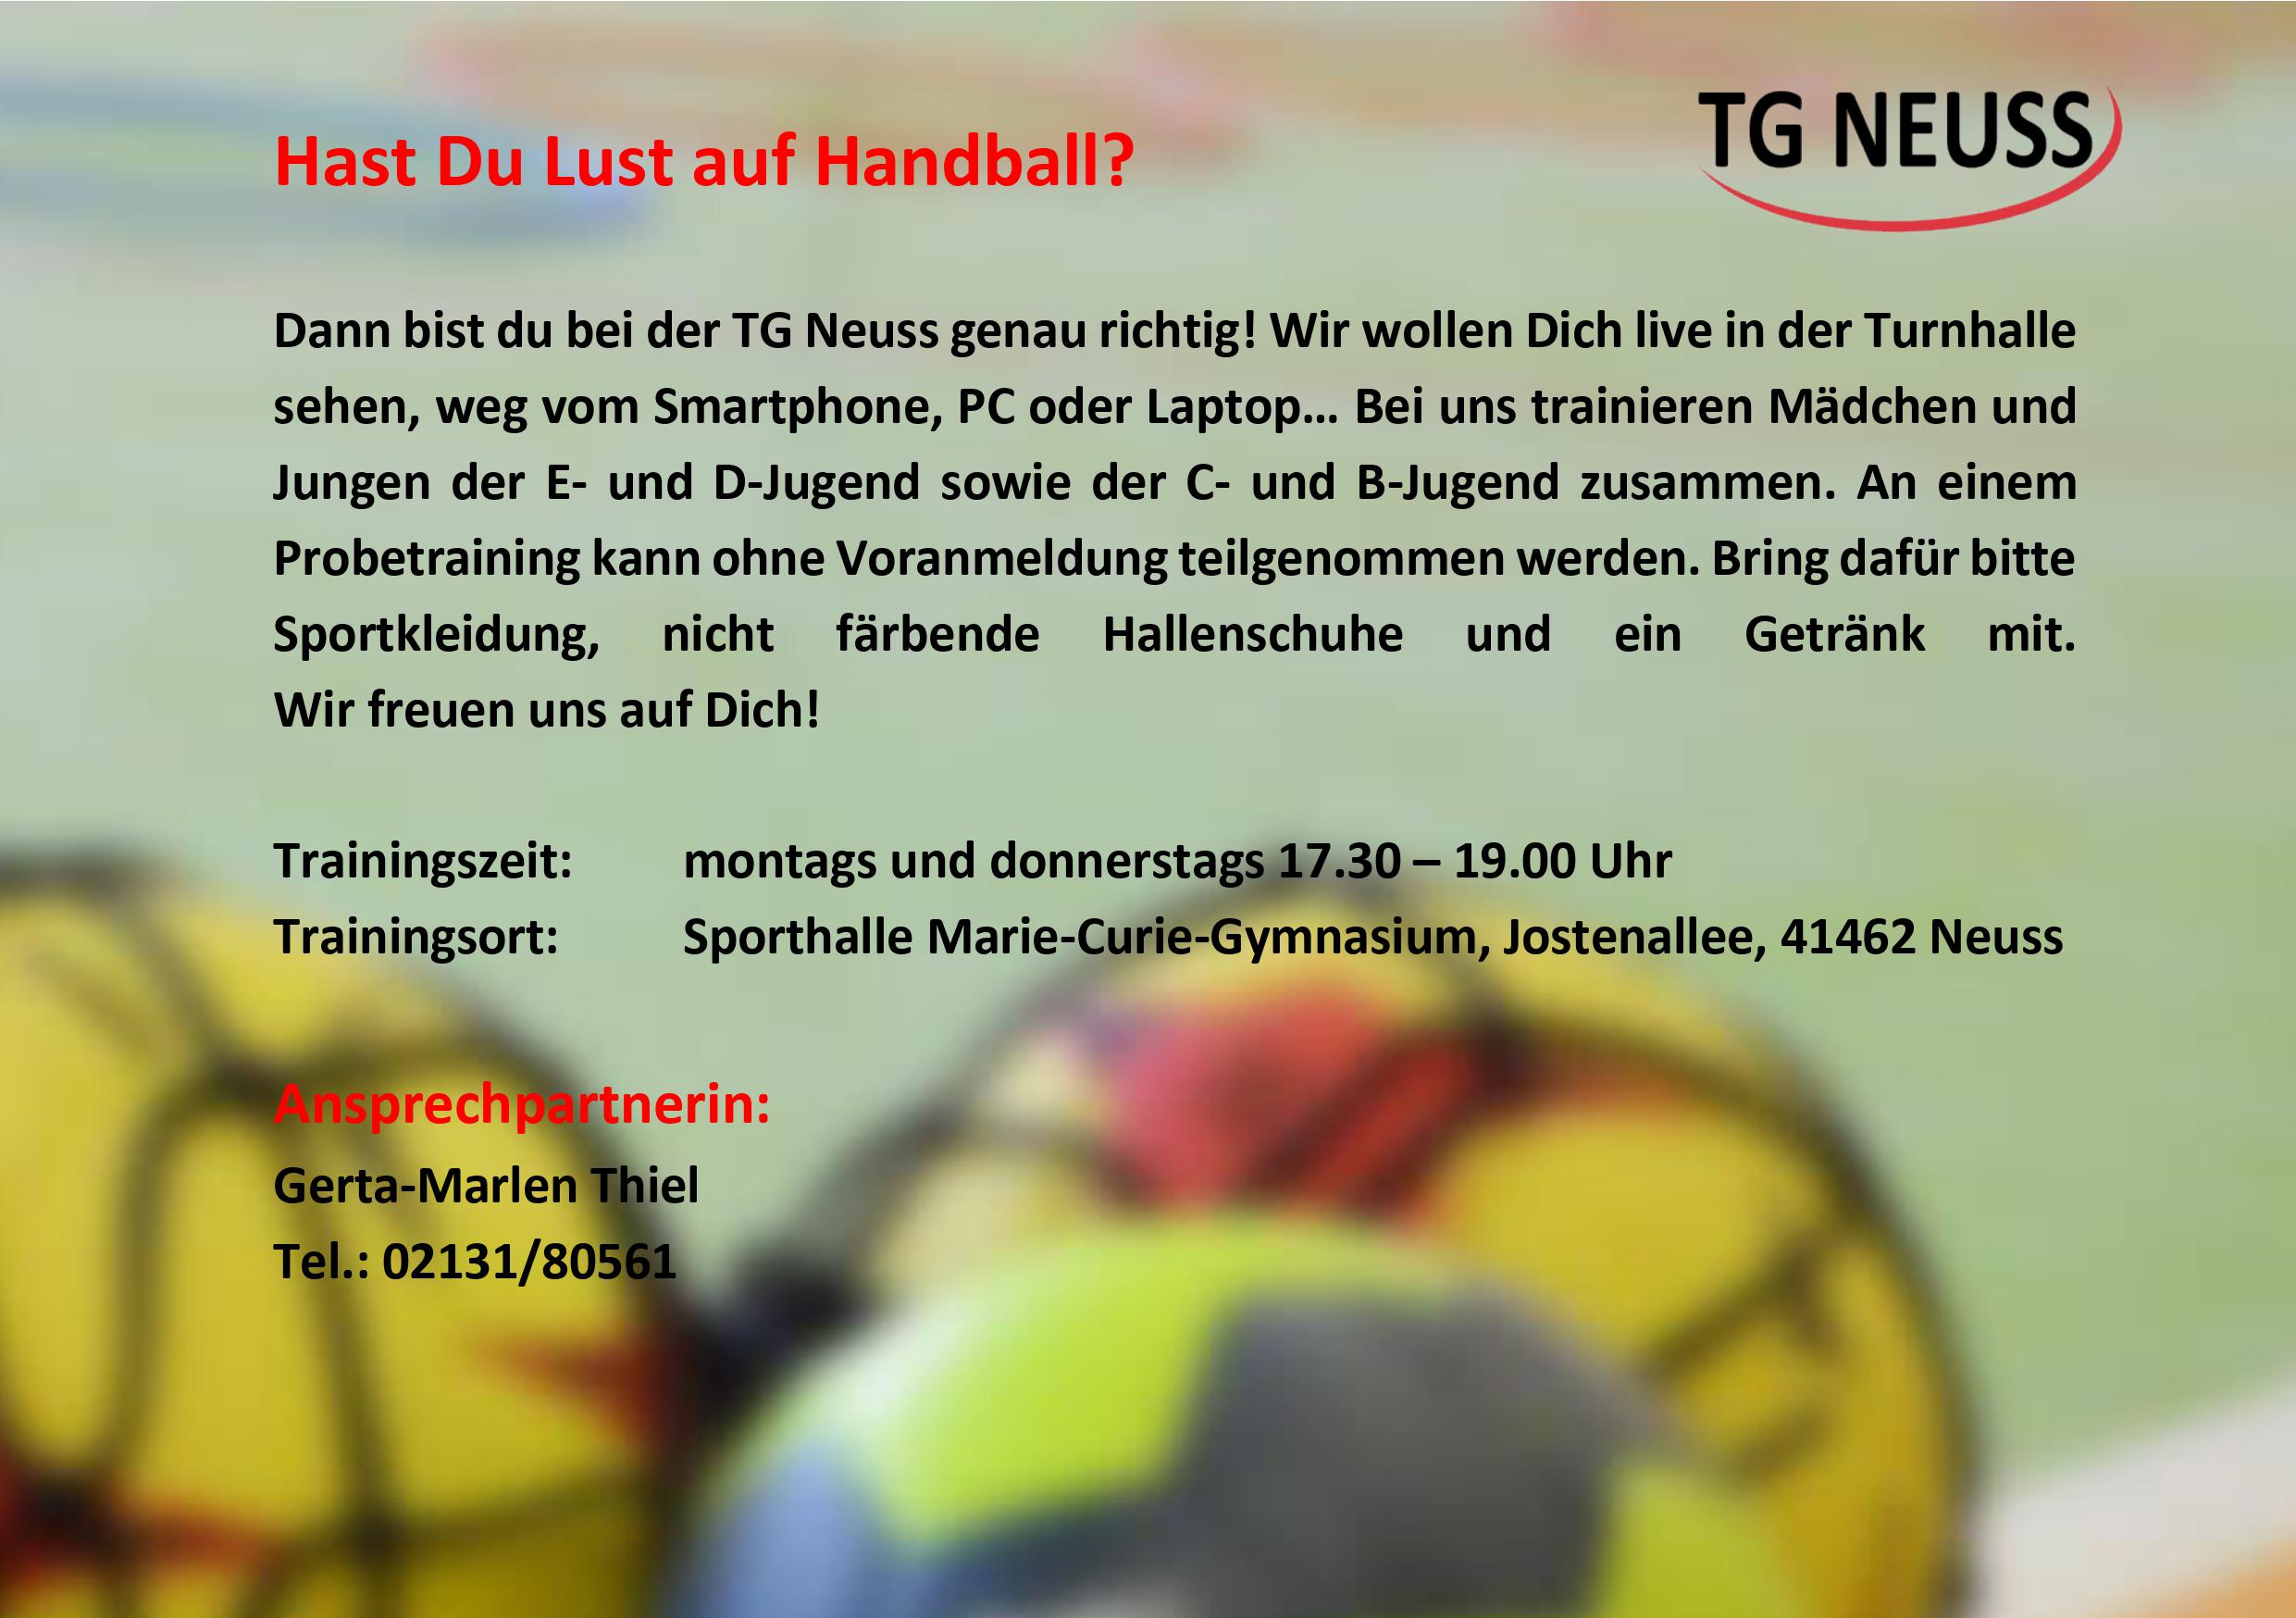 You are currently viewing Handball bei der TG Neuss